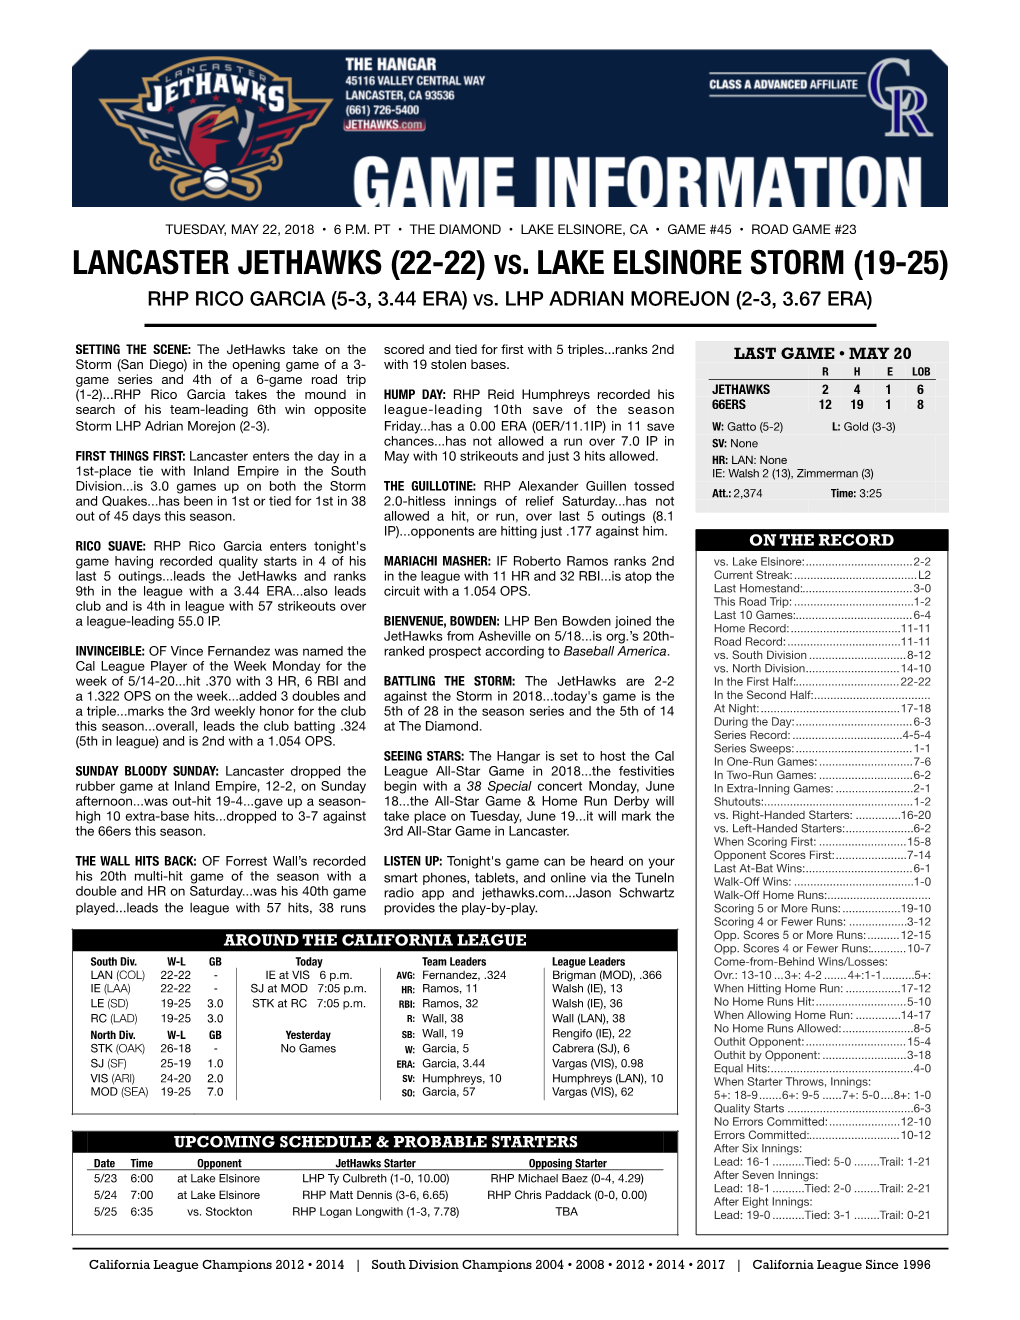 05.22.18 Game Notes at IE (Garcia)